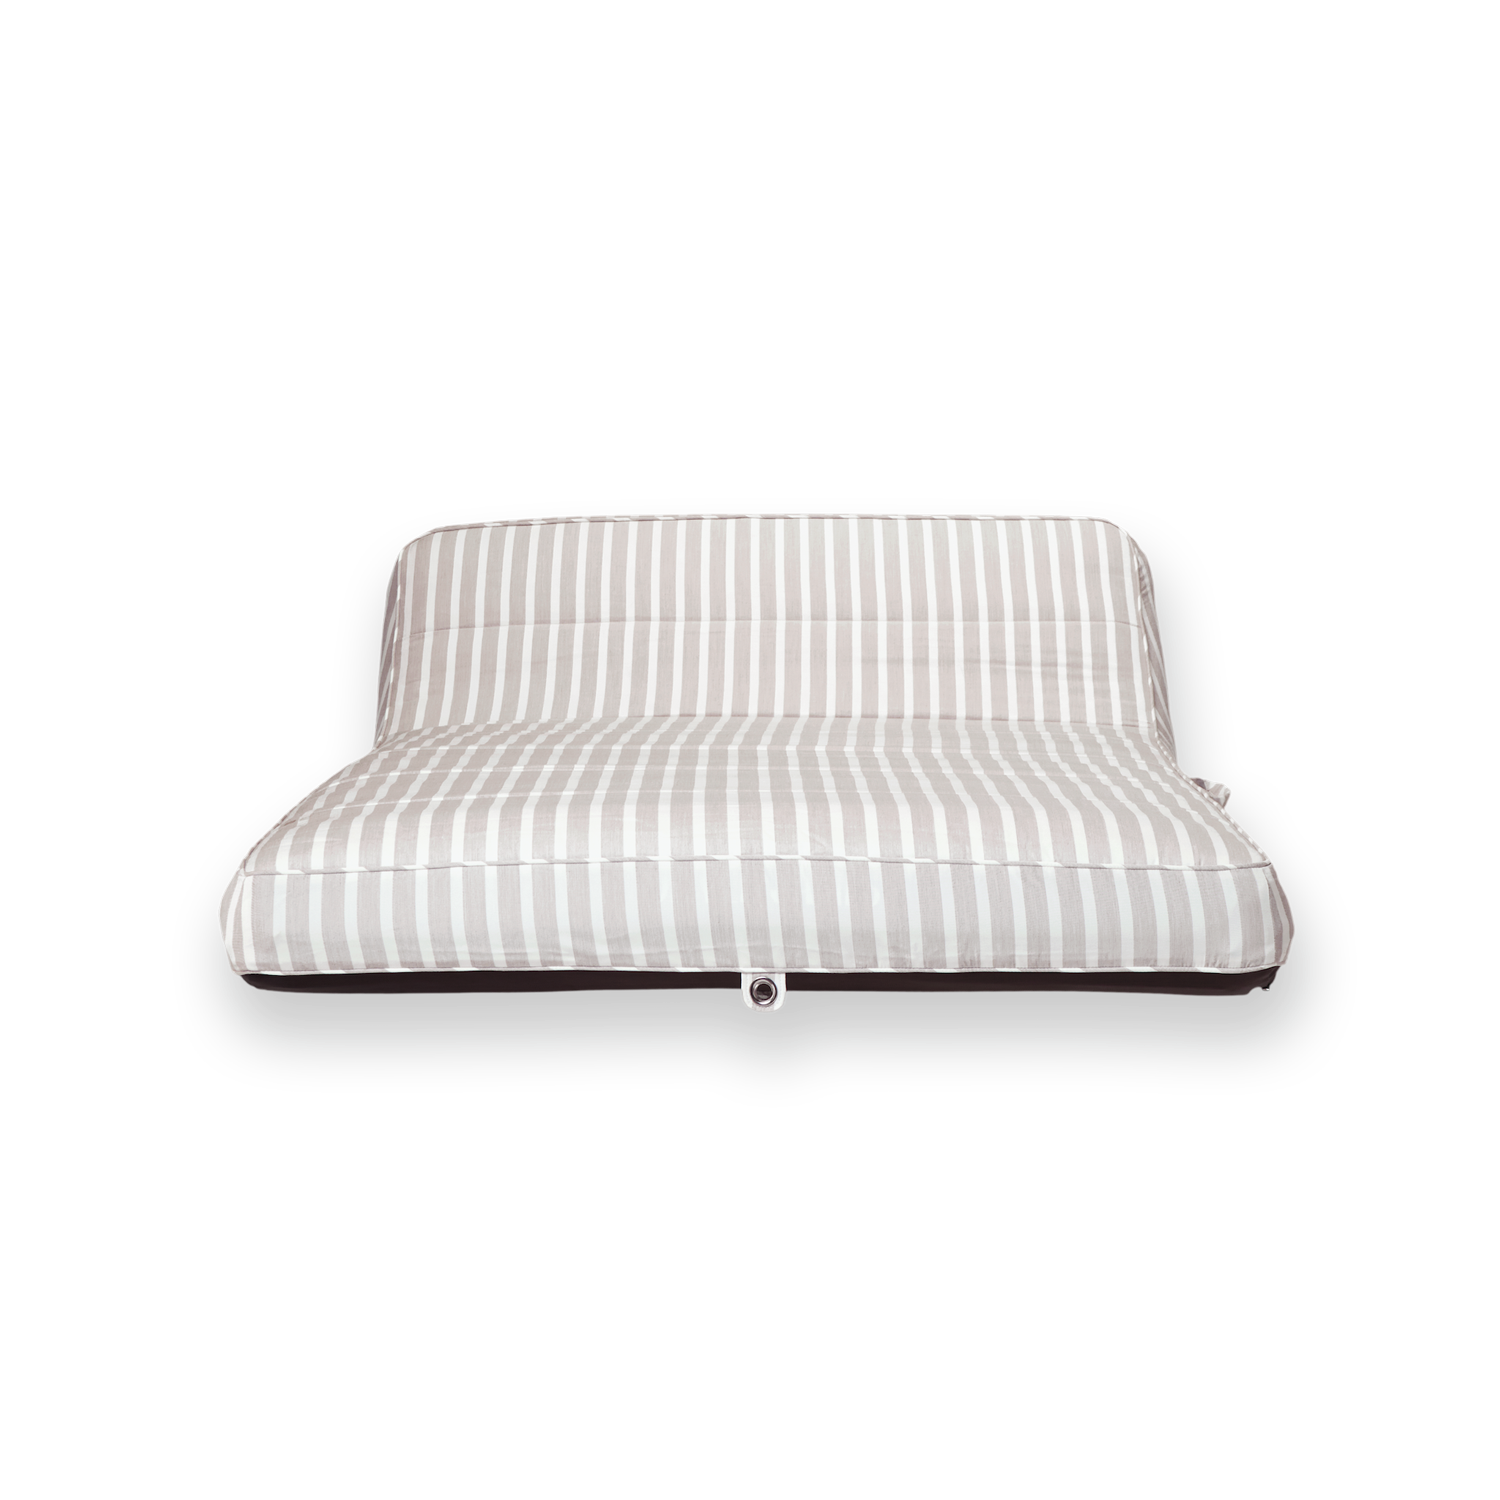 The front profile of a double beige and white striped luxury pool float.